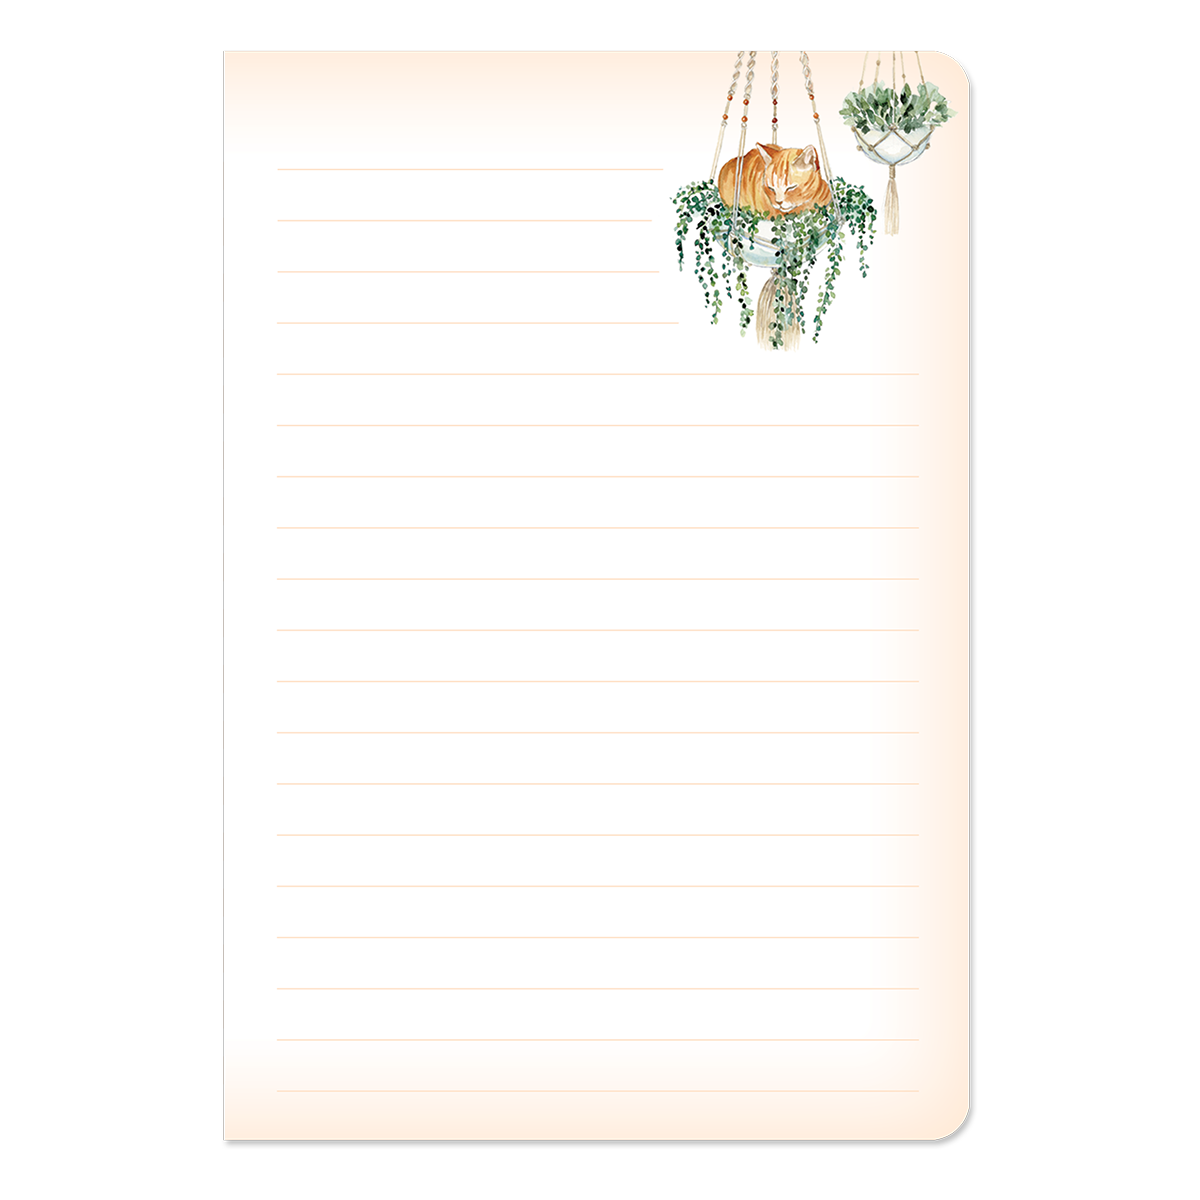 example lined page of notebook with cat sitting in plant in top corner.